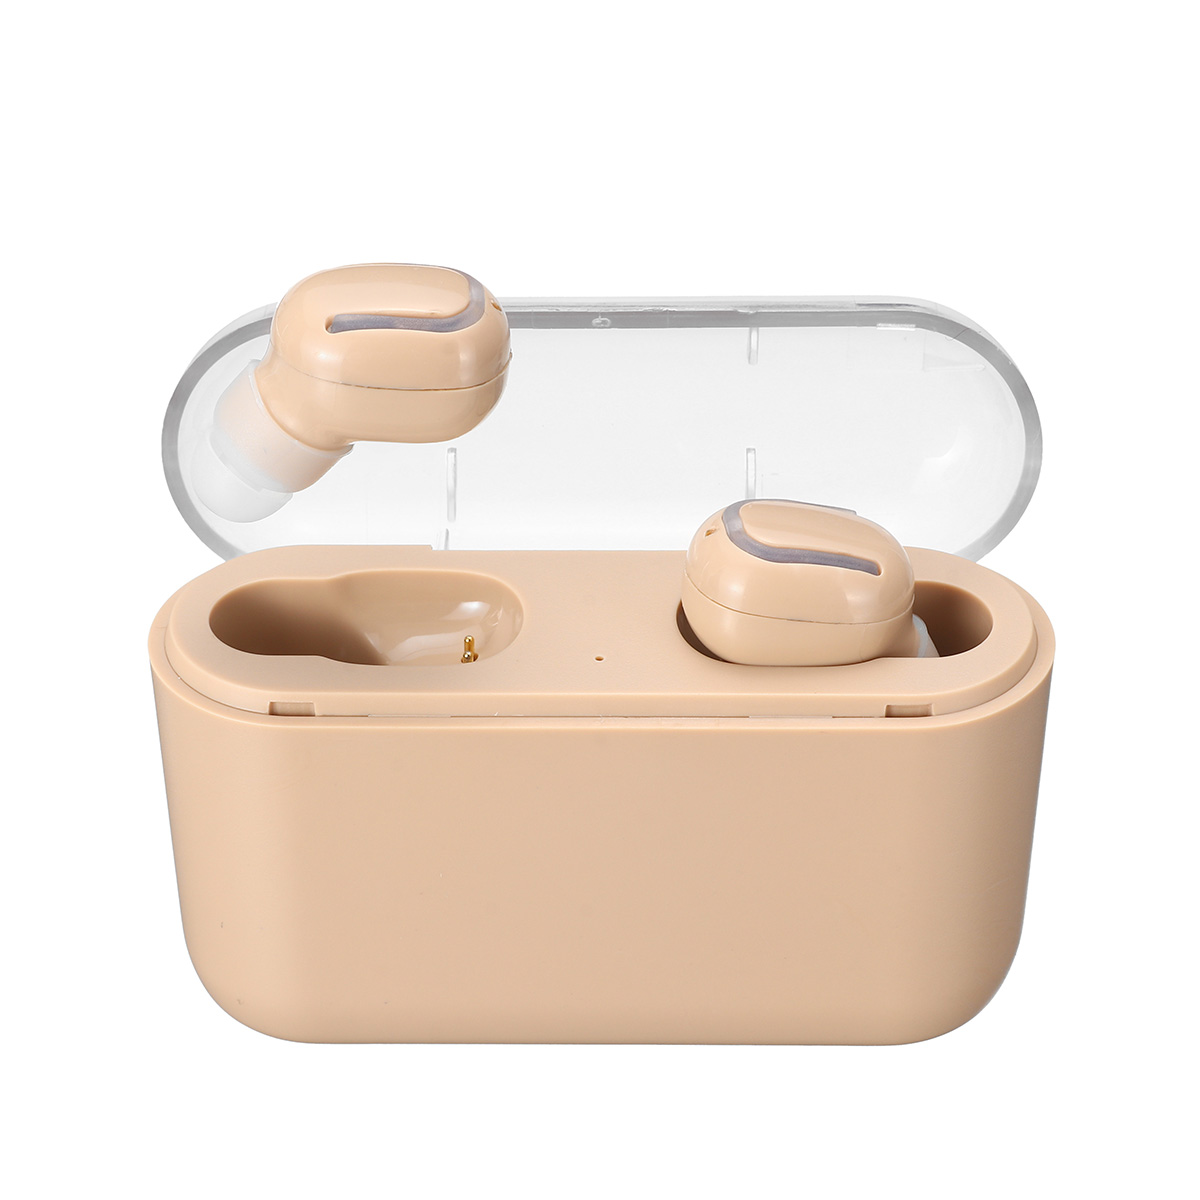 Find bluetooth 5 0 TWS Earphone CVC6 0 Noise Cancelling 2200mAh Power Bank IPX5 Waterproof Headphone with Mic for Sale on Gipsybee.com with cryptocurrencies